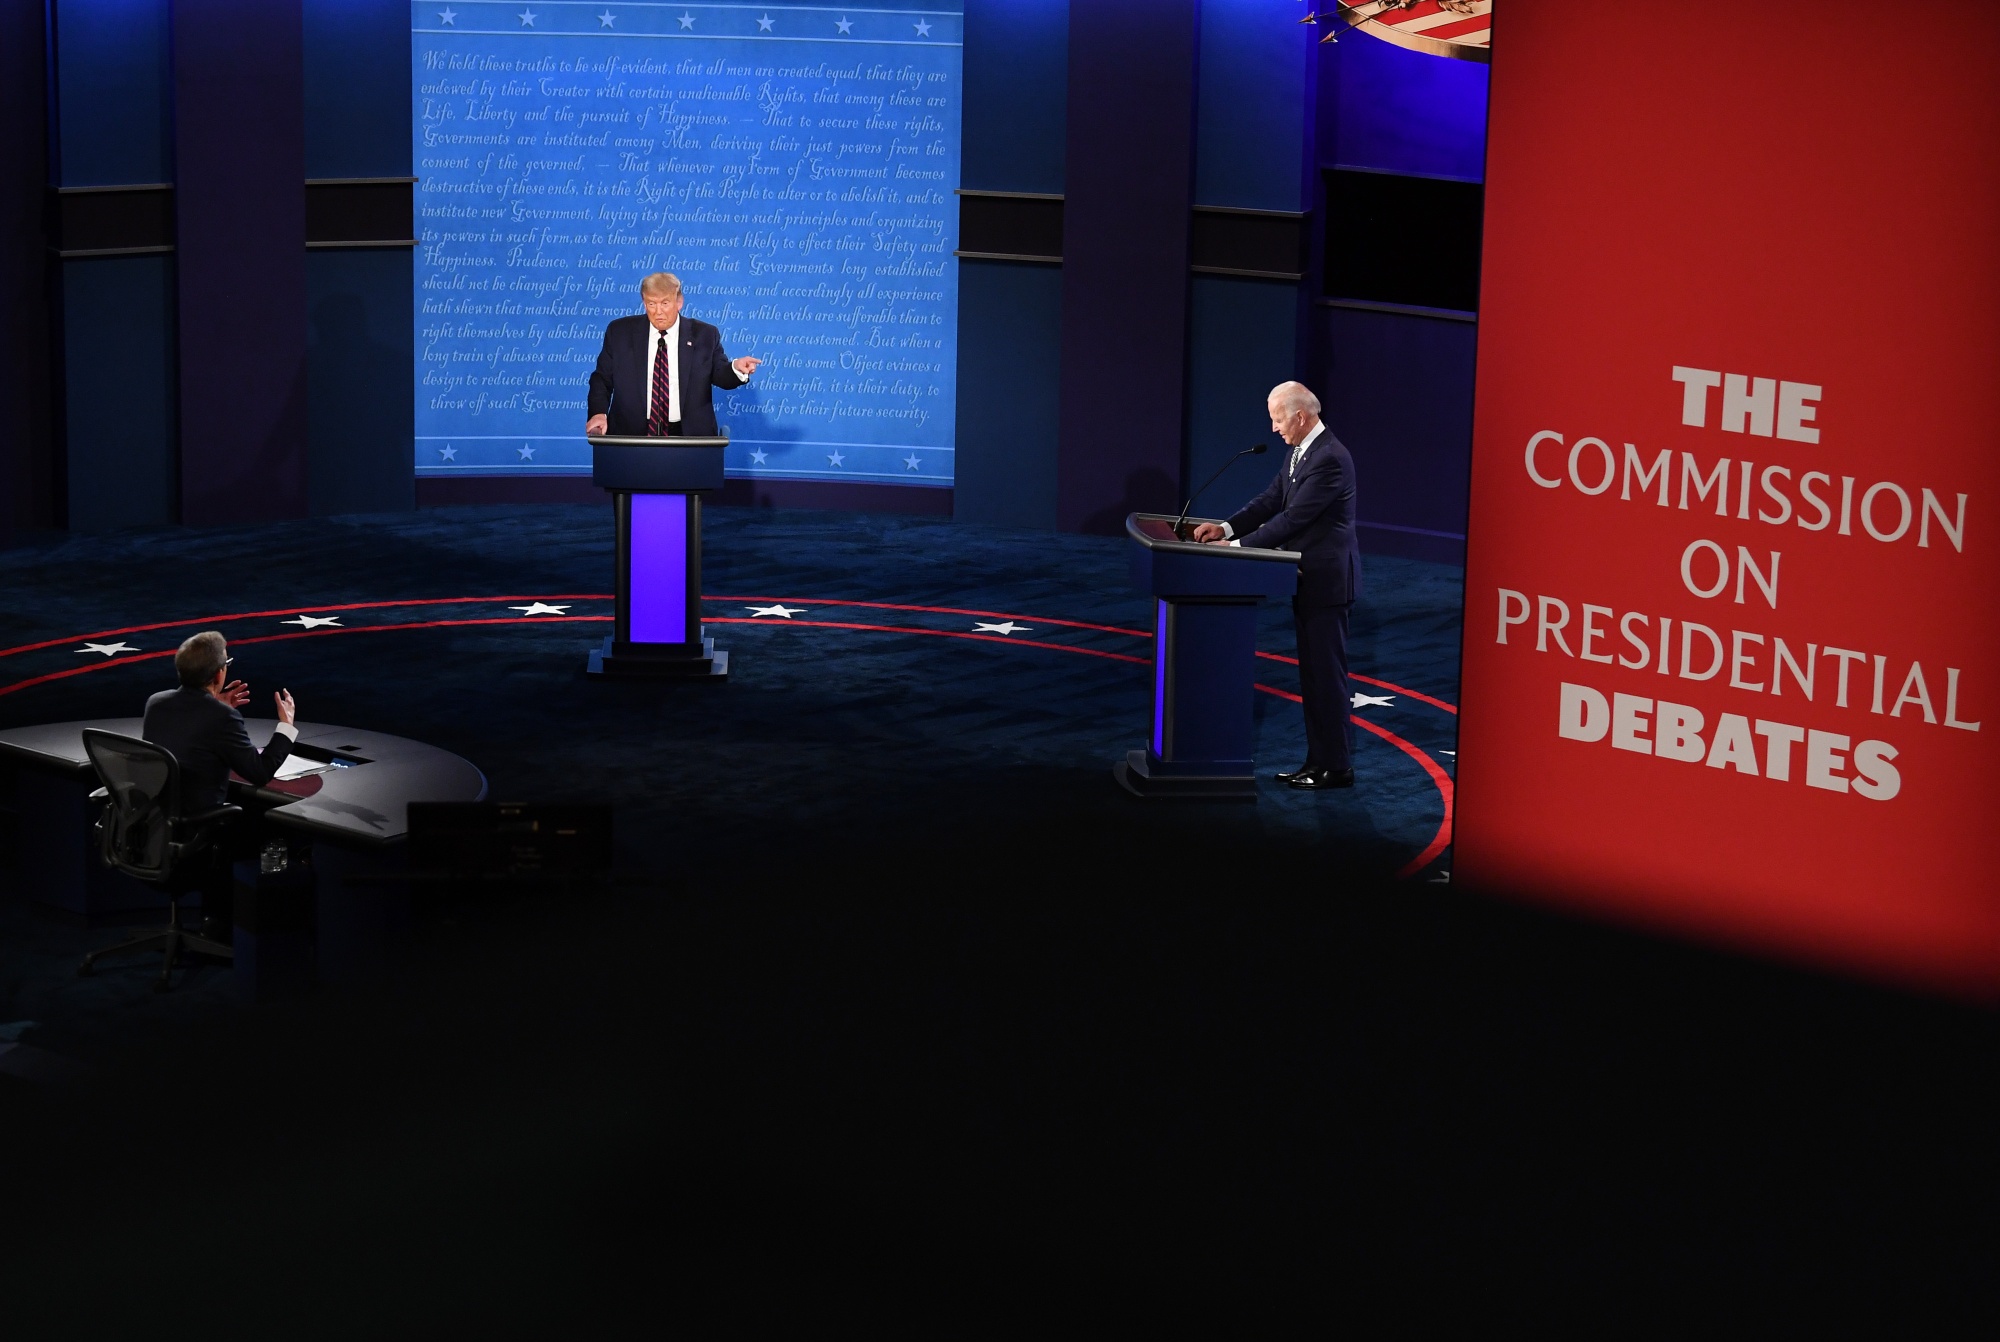 Donald Trump, left, and Joe Biden take part in the first U.S. presidential debate, in Cleveland, Ohio, U.S., on Sept. 29.